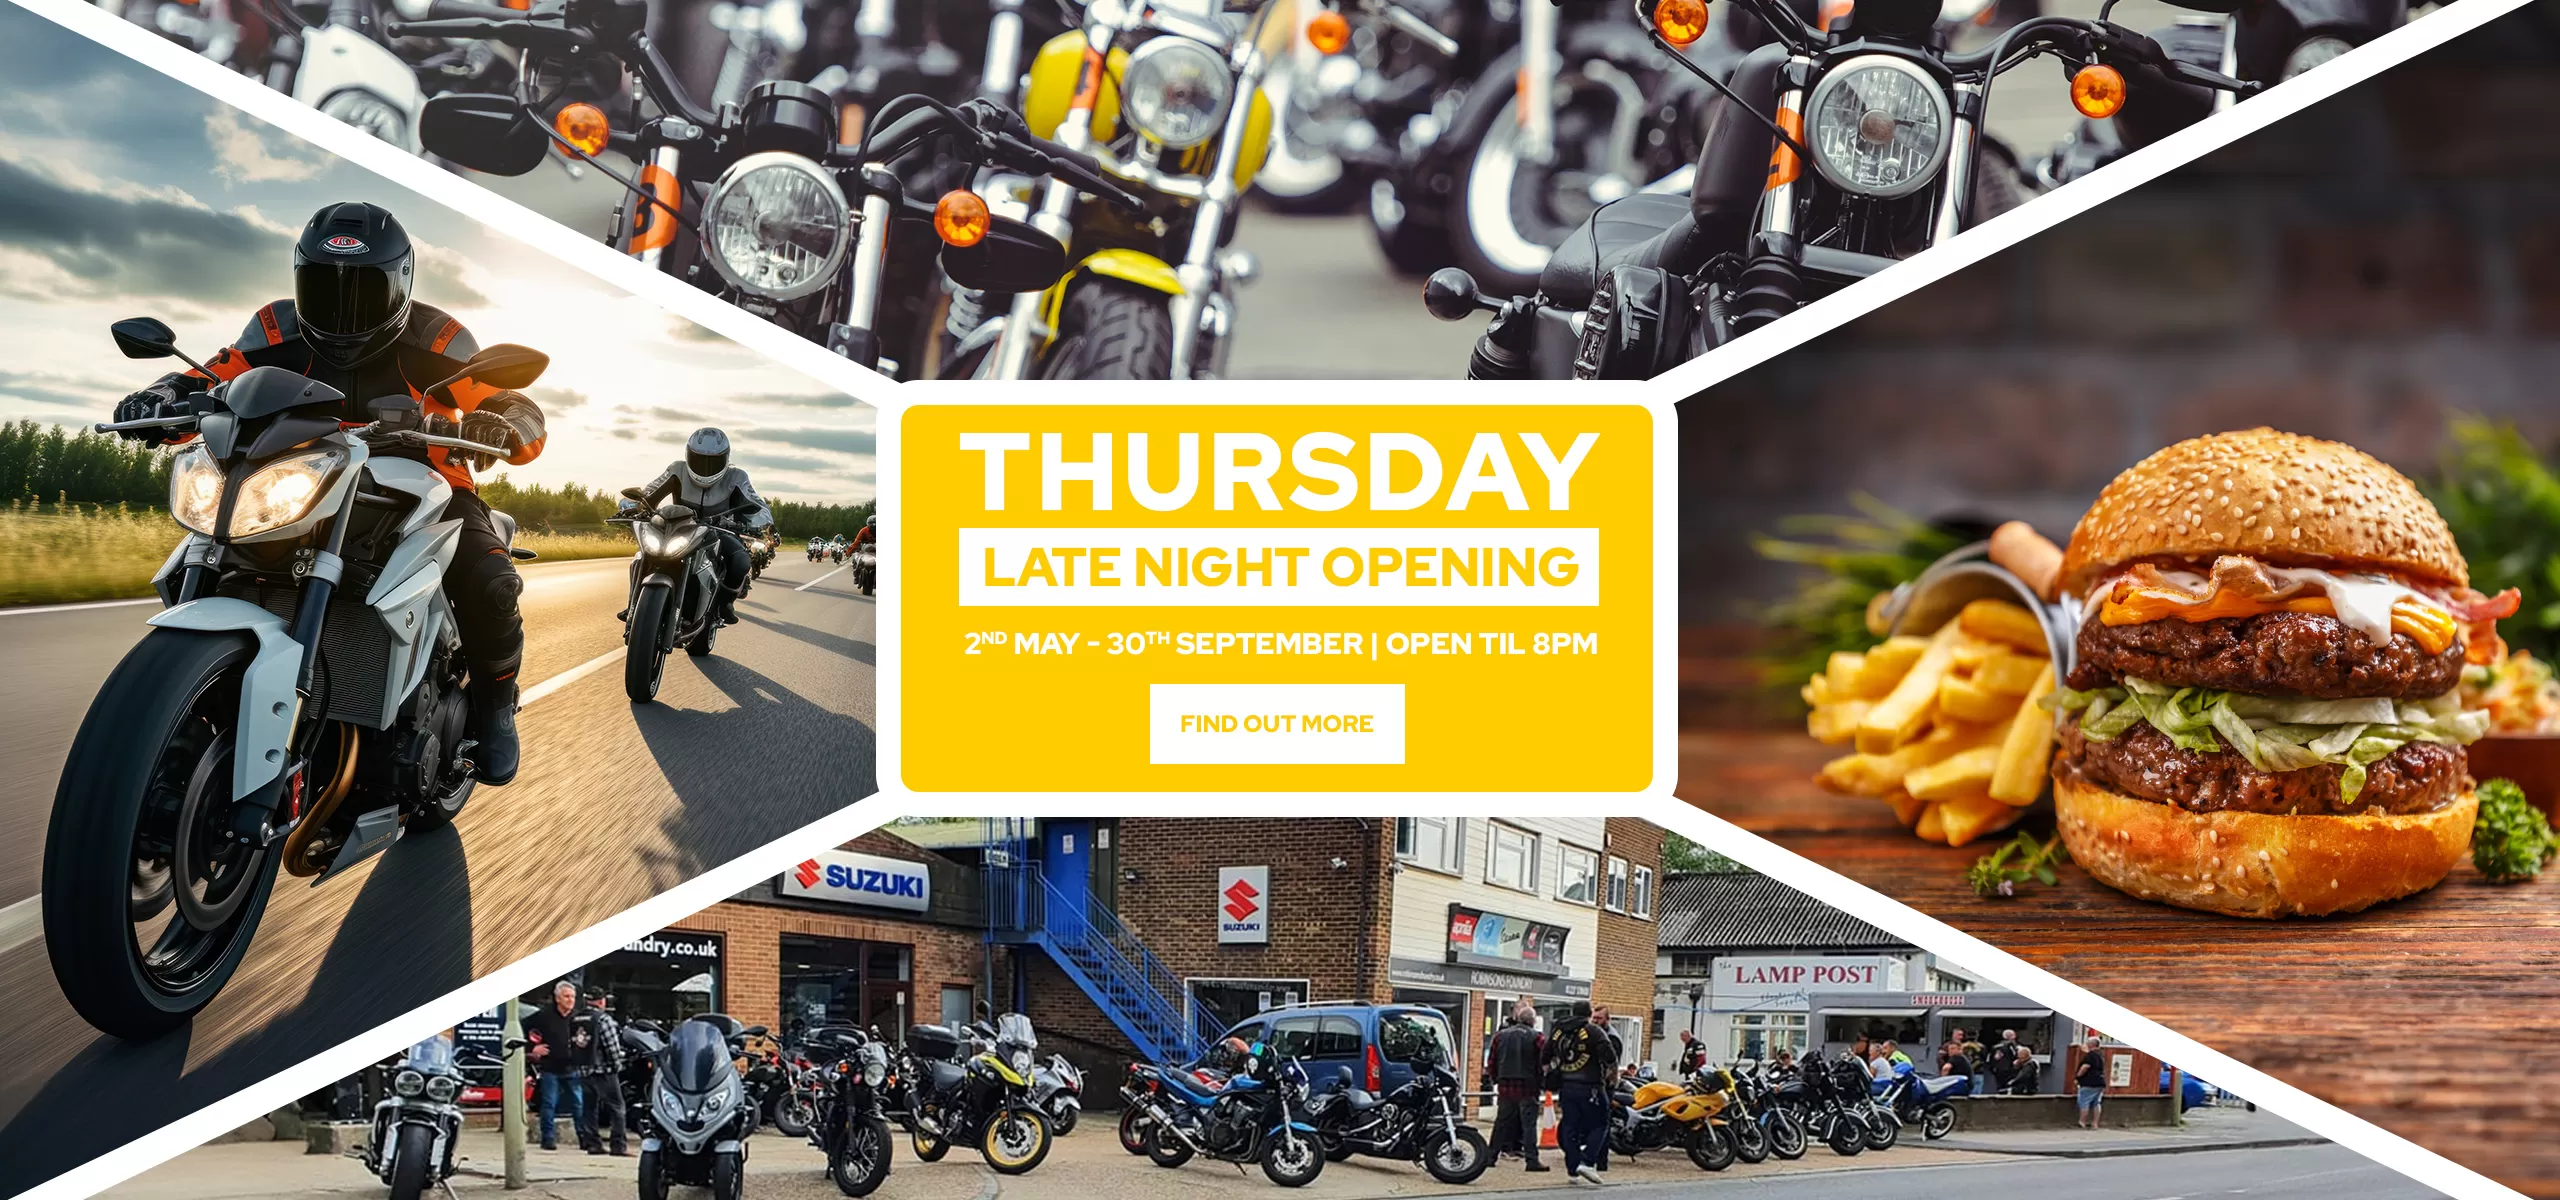 Thursday Late Night Opening at Robinsons Foundry from 2nd May 2024 until 8pm